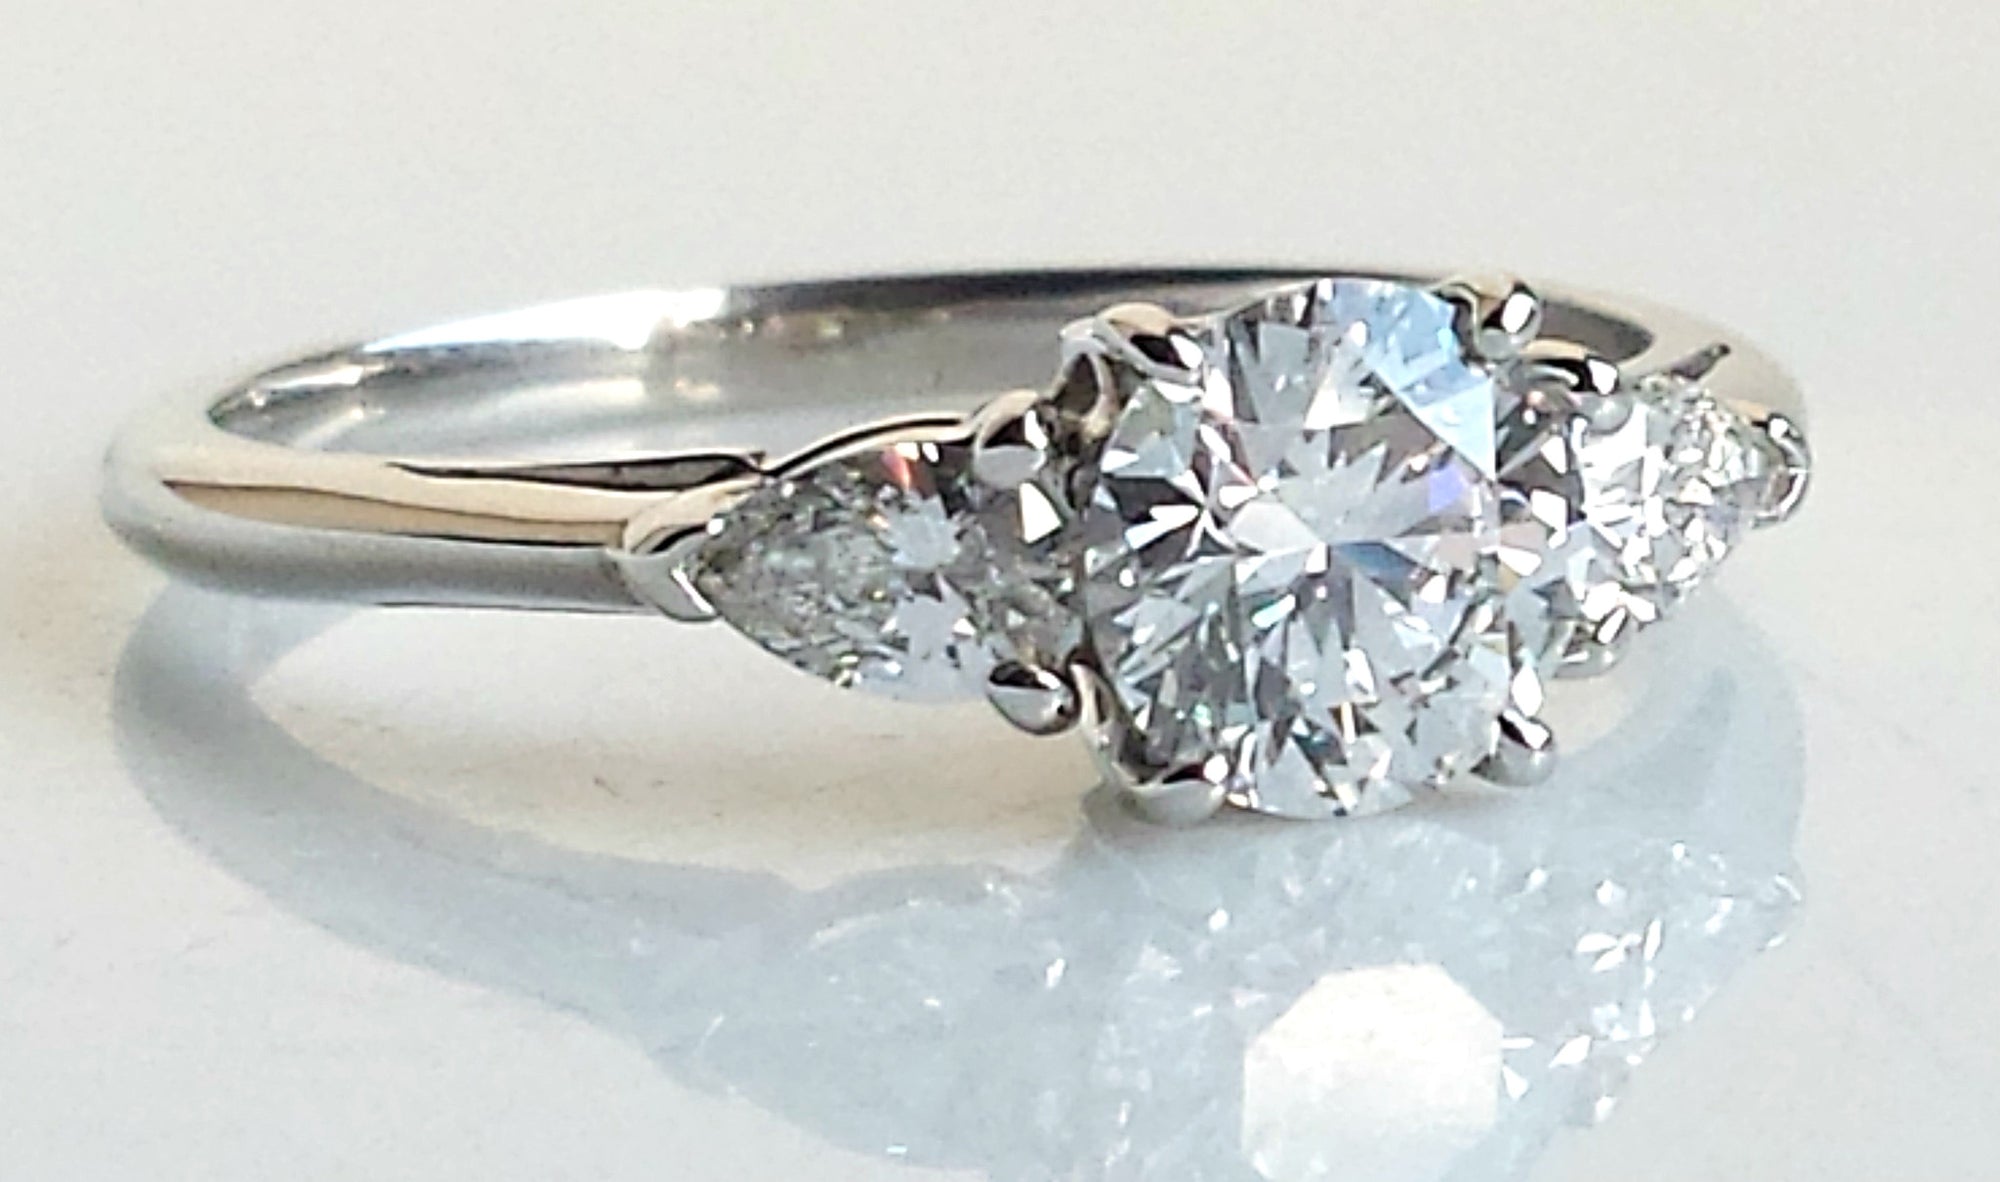 Tiffany & Co. 1.24ct G/VS1 Round Brilliant Cut Diamond Engagement Ring with Pear-shaped Side Stones